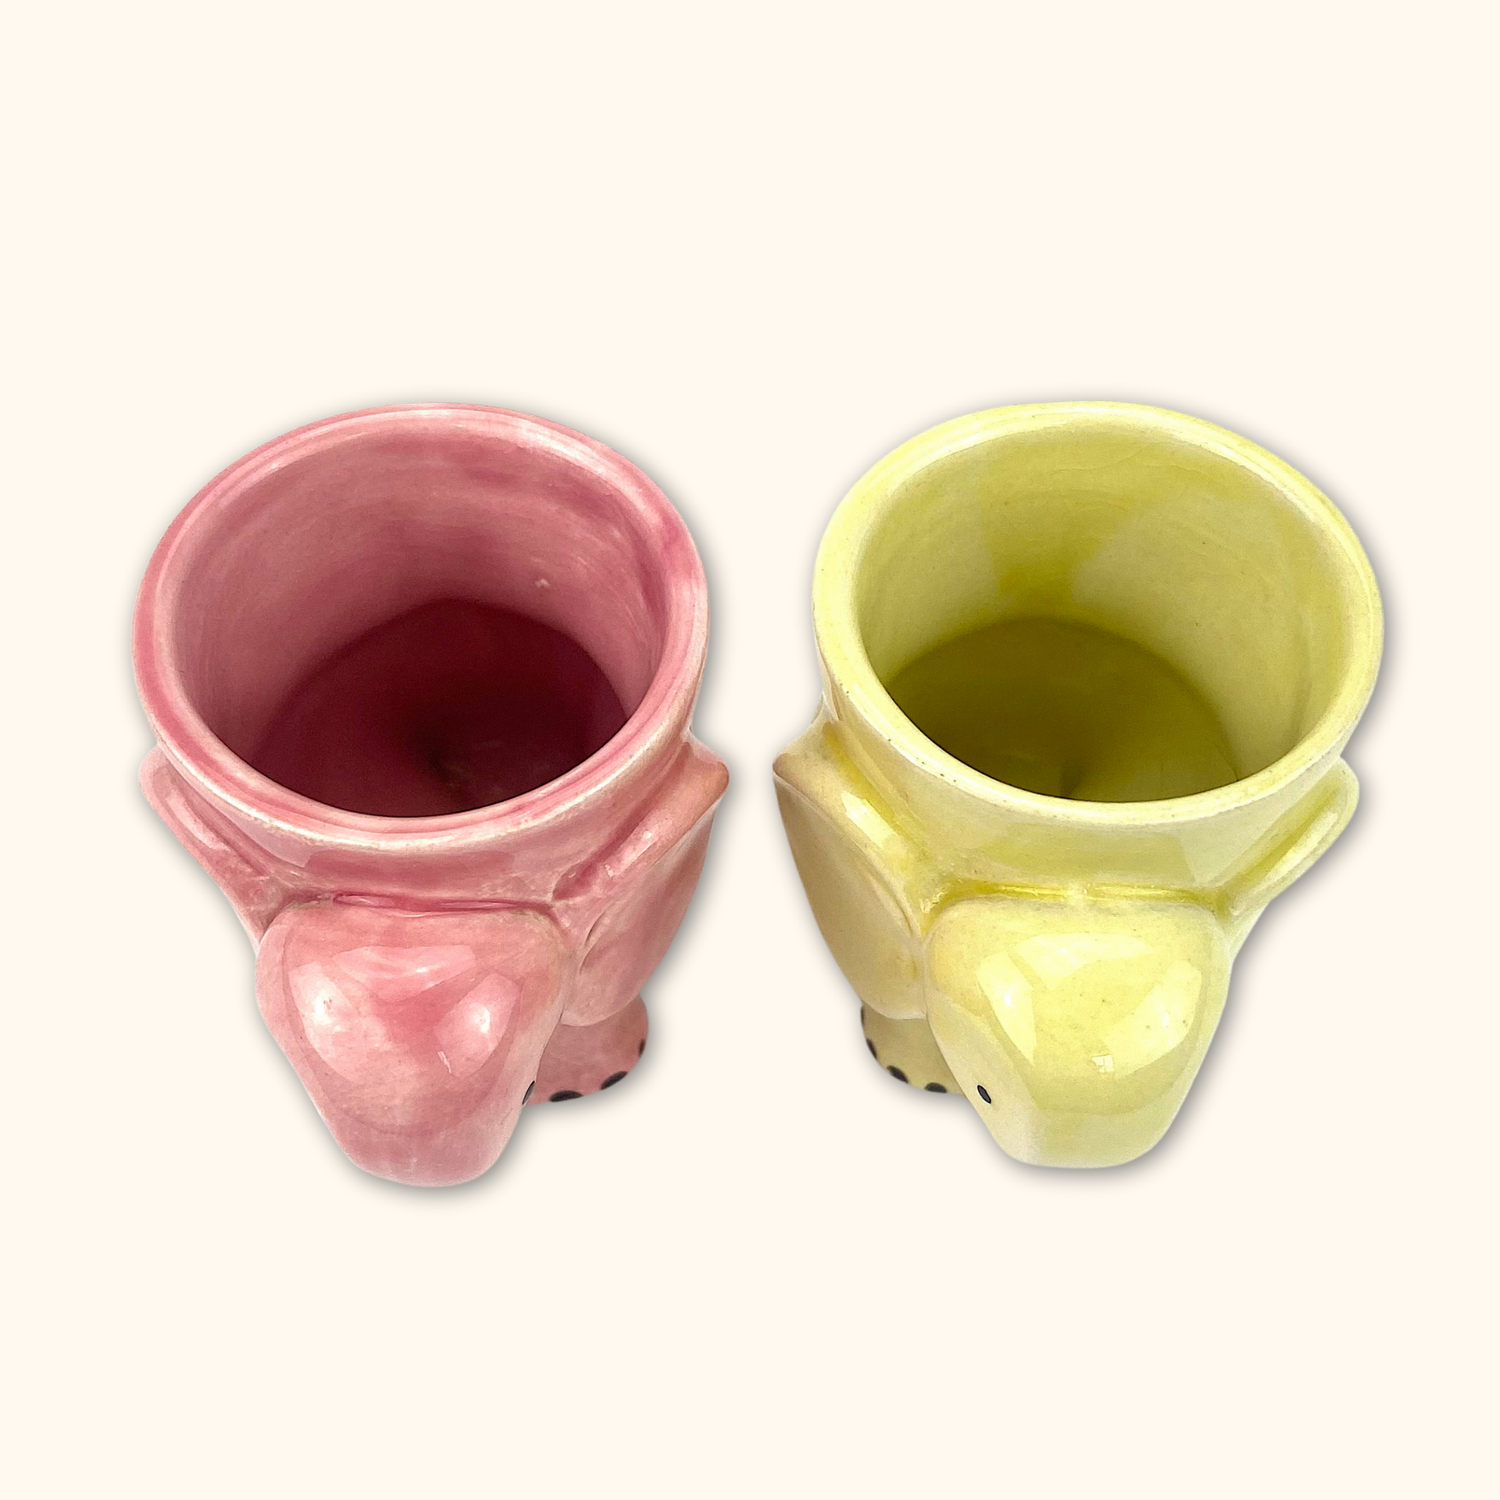 Pink and Yellow Elephant Egg Cup Holder - Set of 2 - Sunshine Thrift - Kitchenware